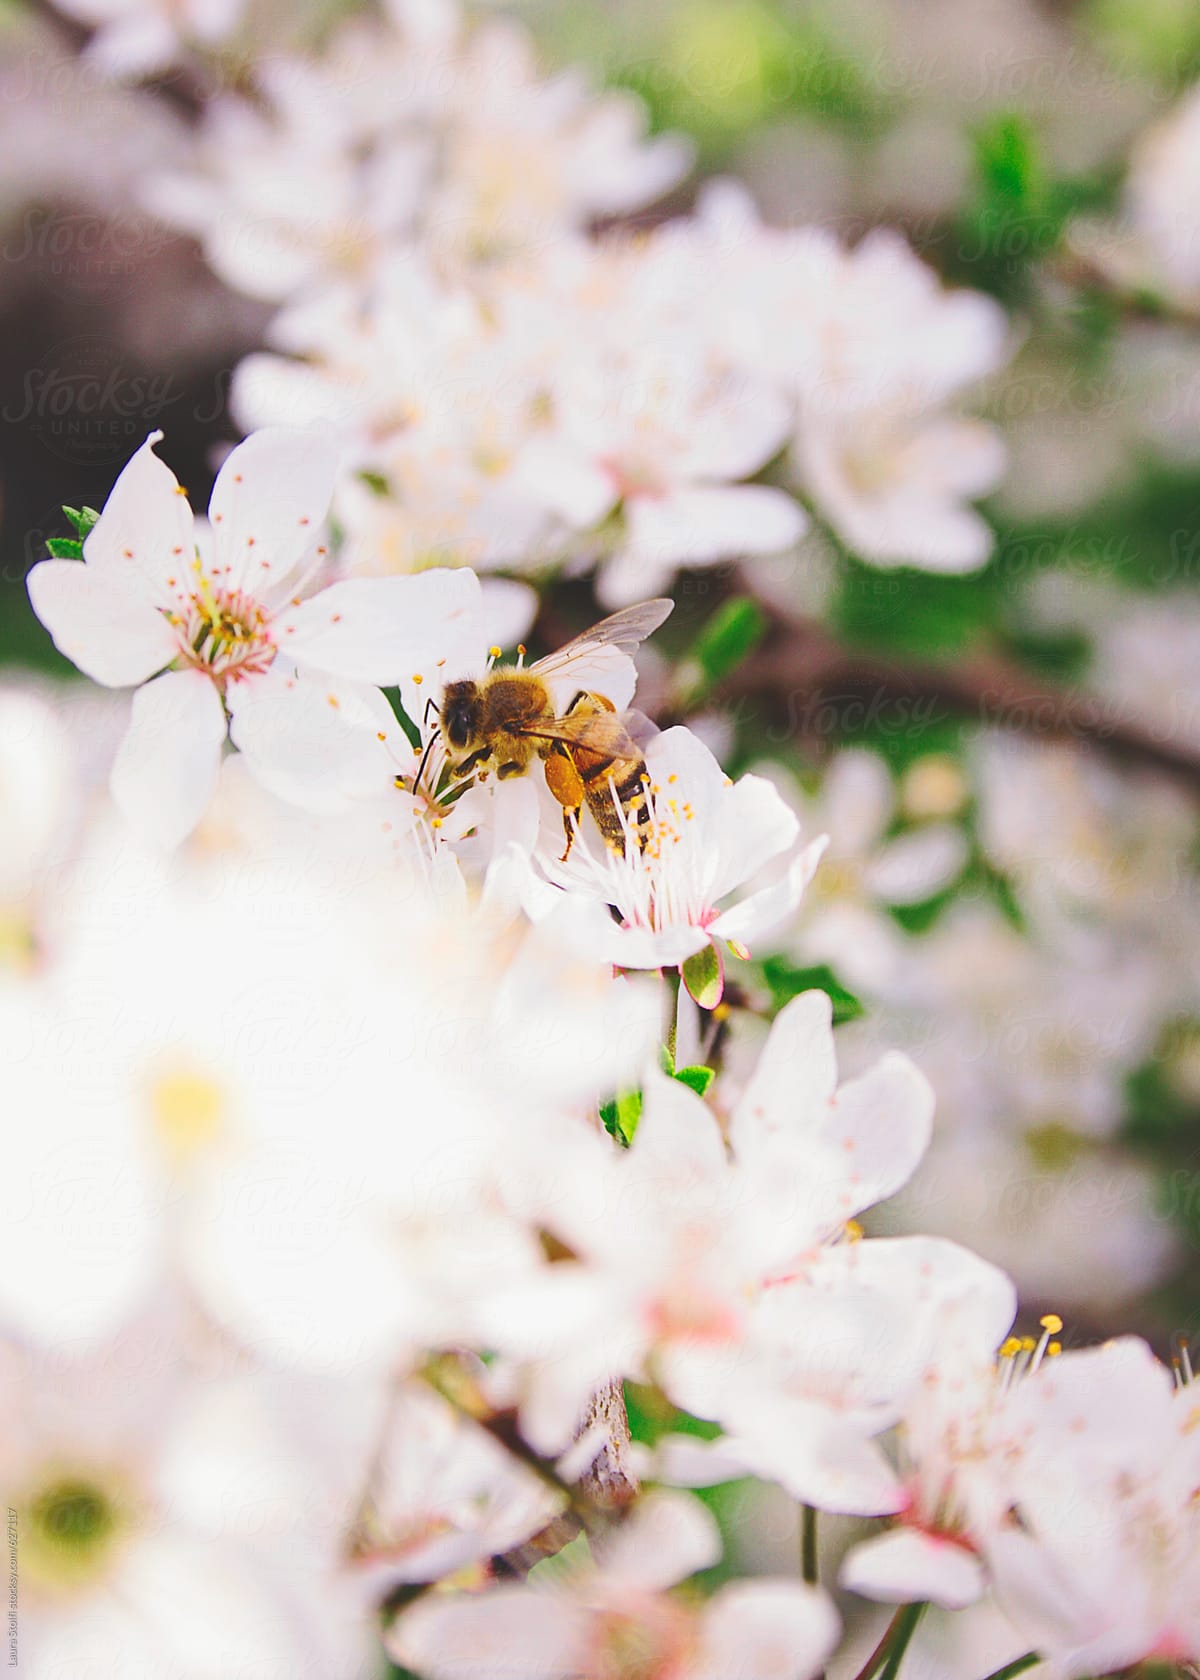 Bee with legs full of pollen on plum flowers